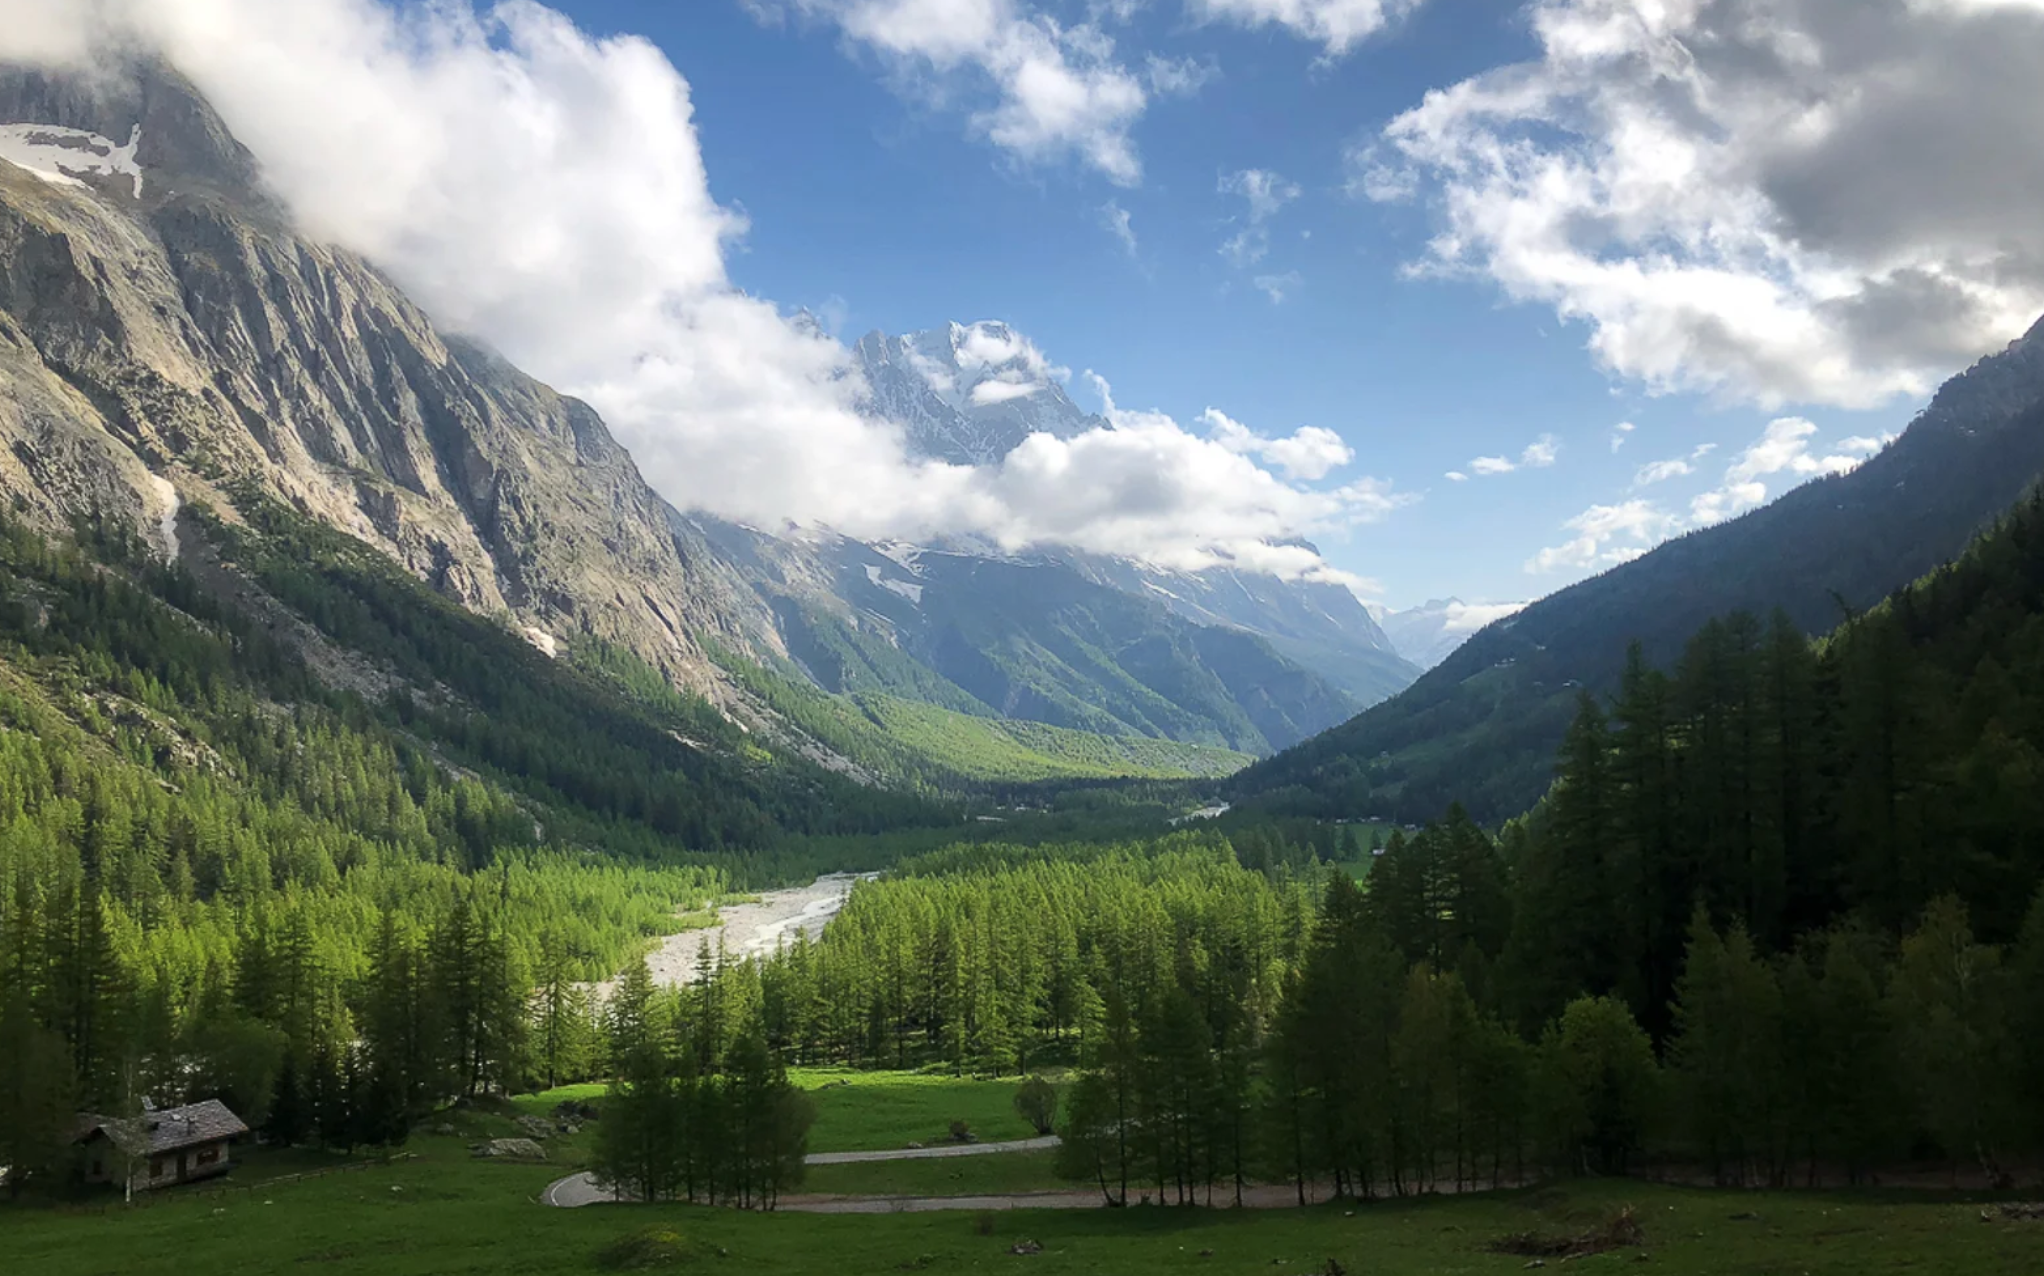 The new camping experience a Courmayeur